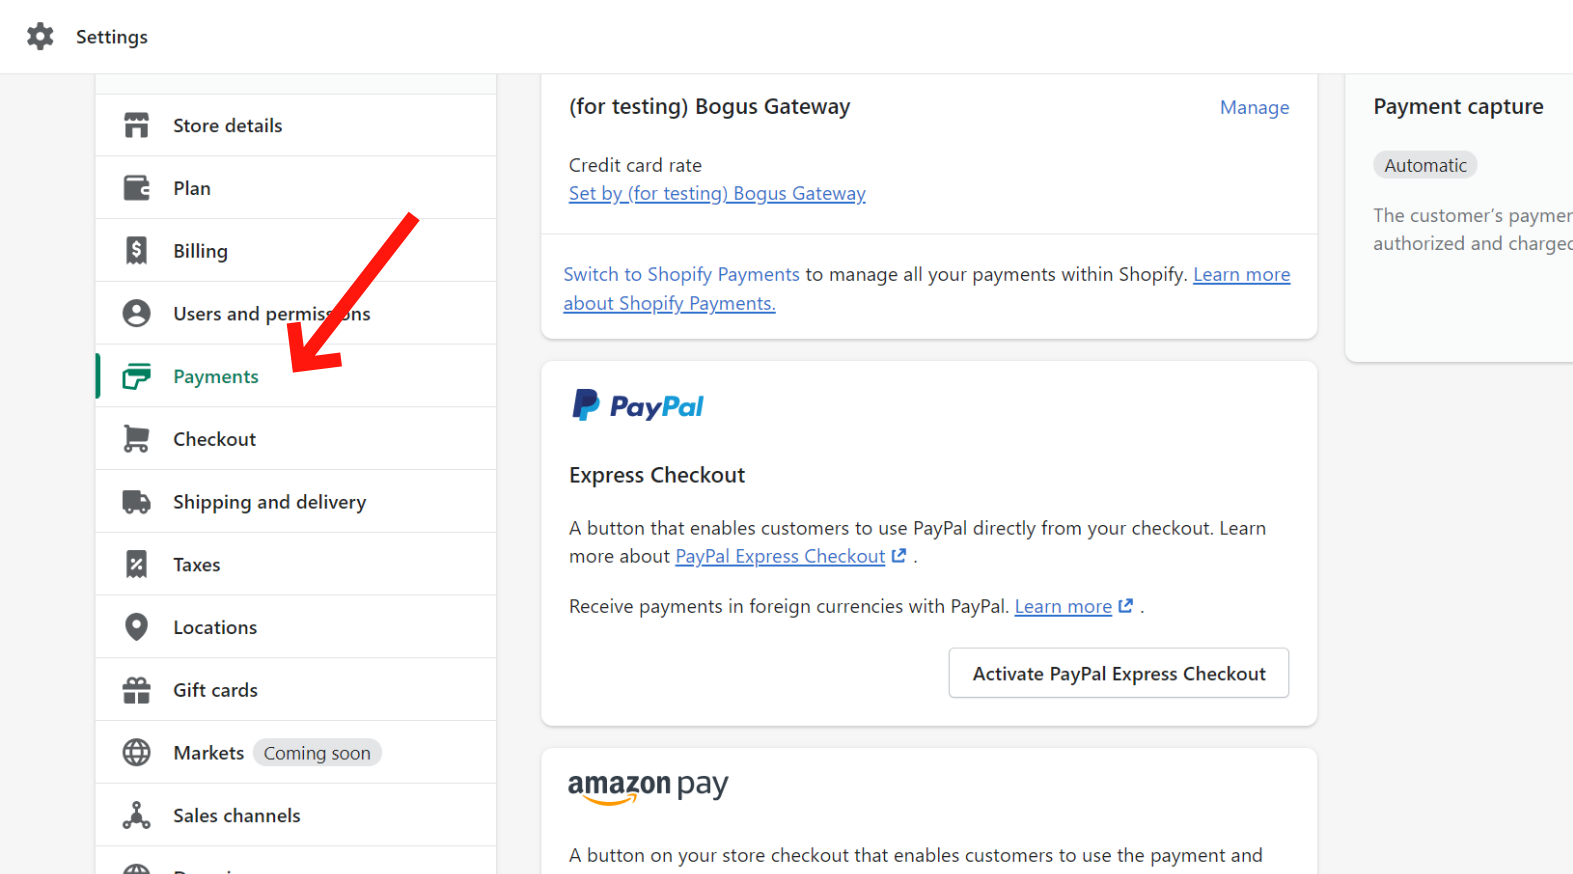 Open Shopify Payments settings